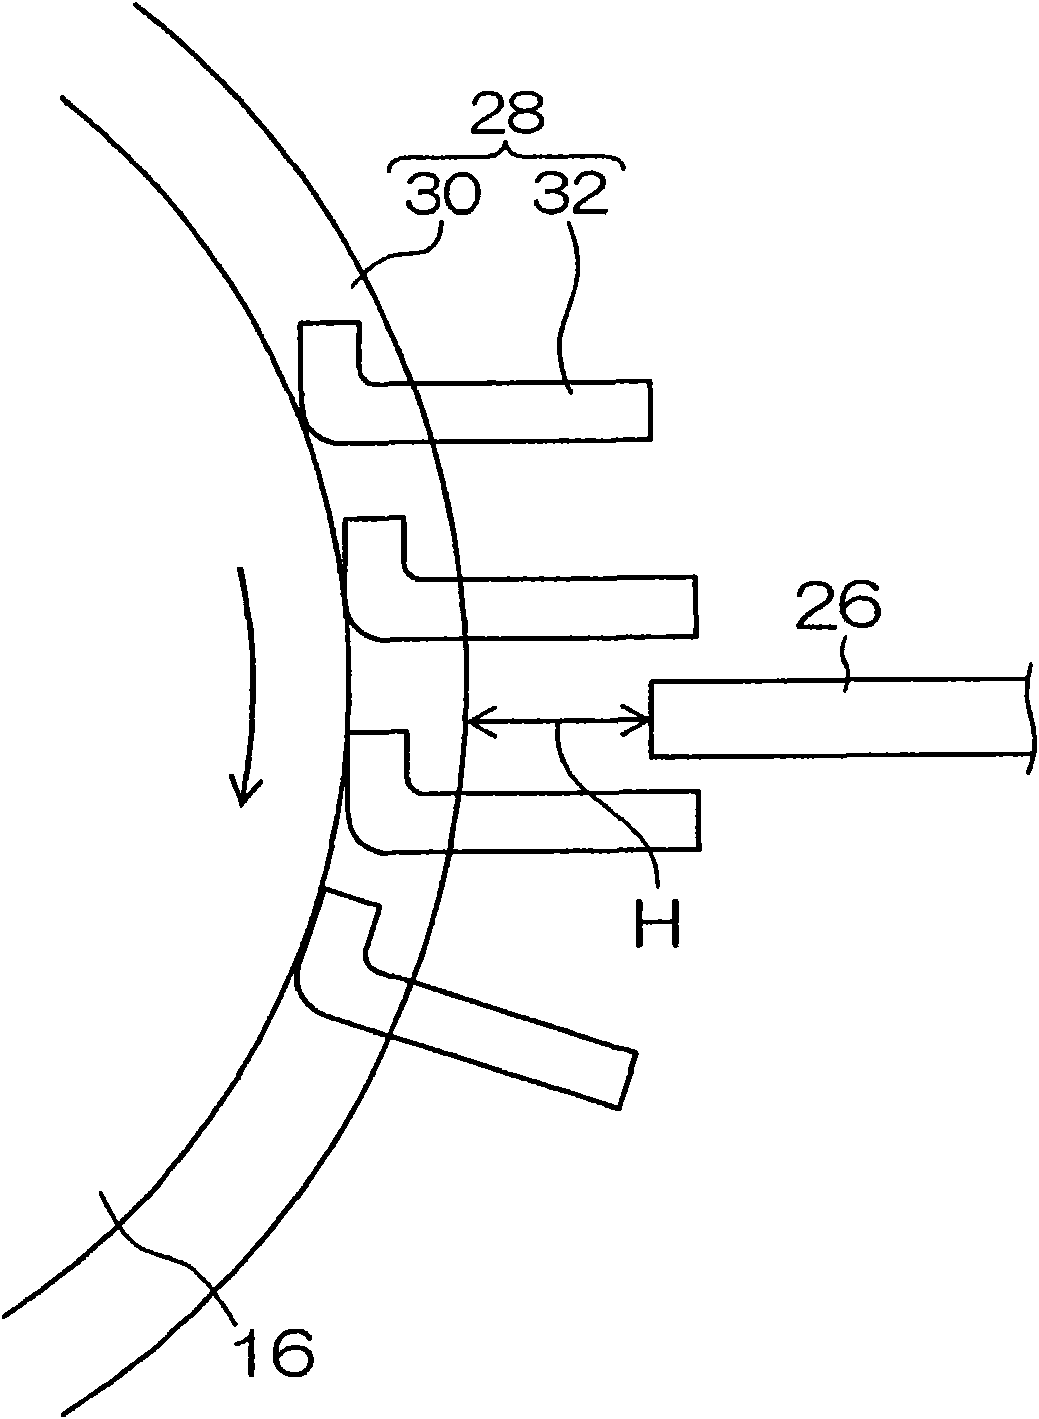 Grinding treatment method and device